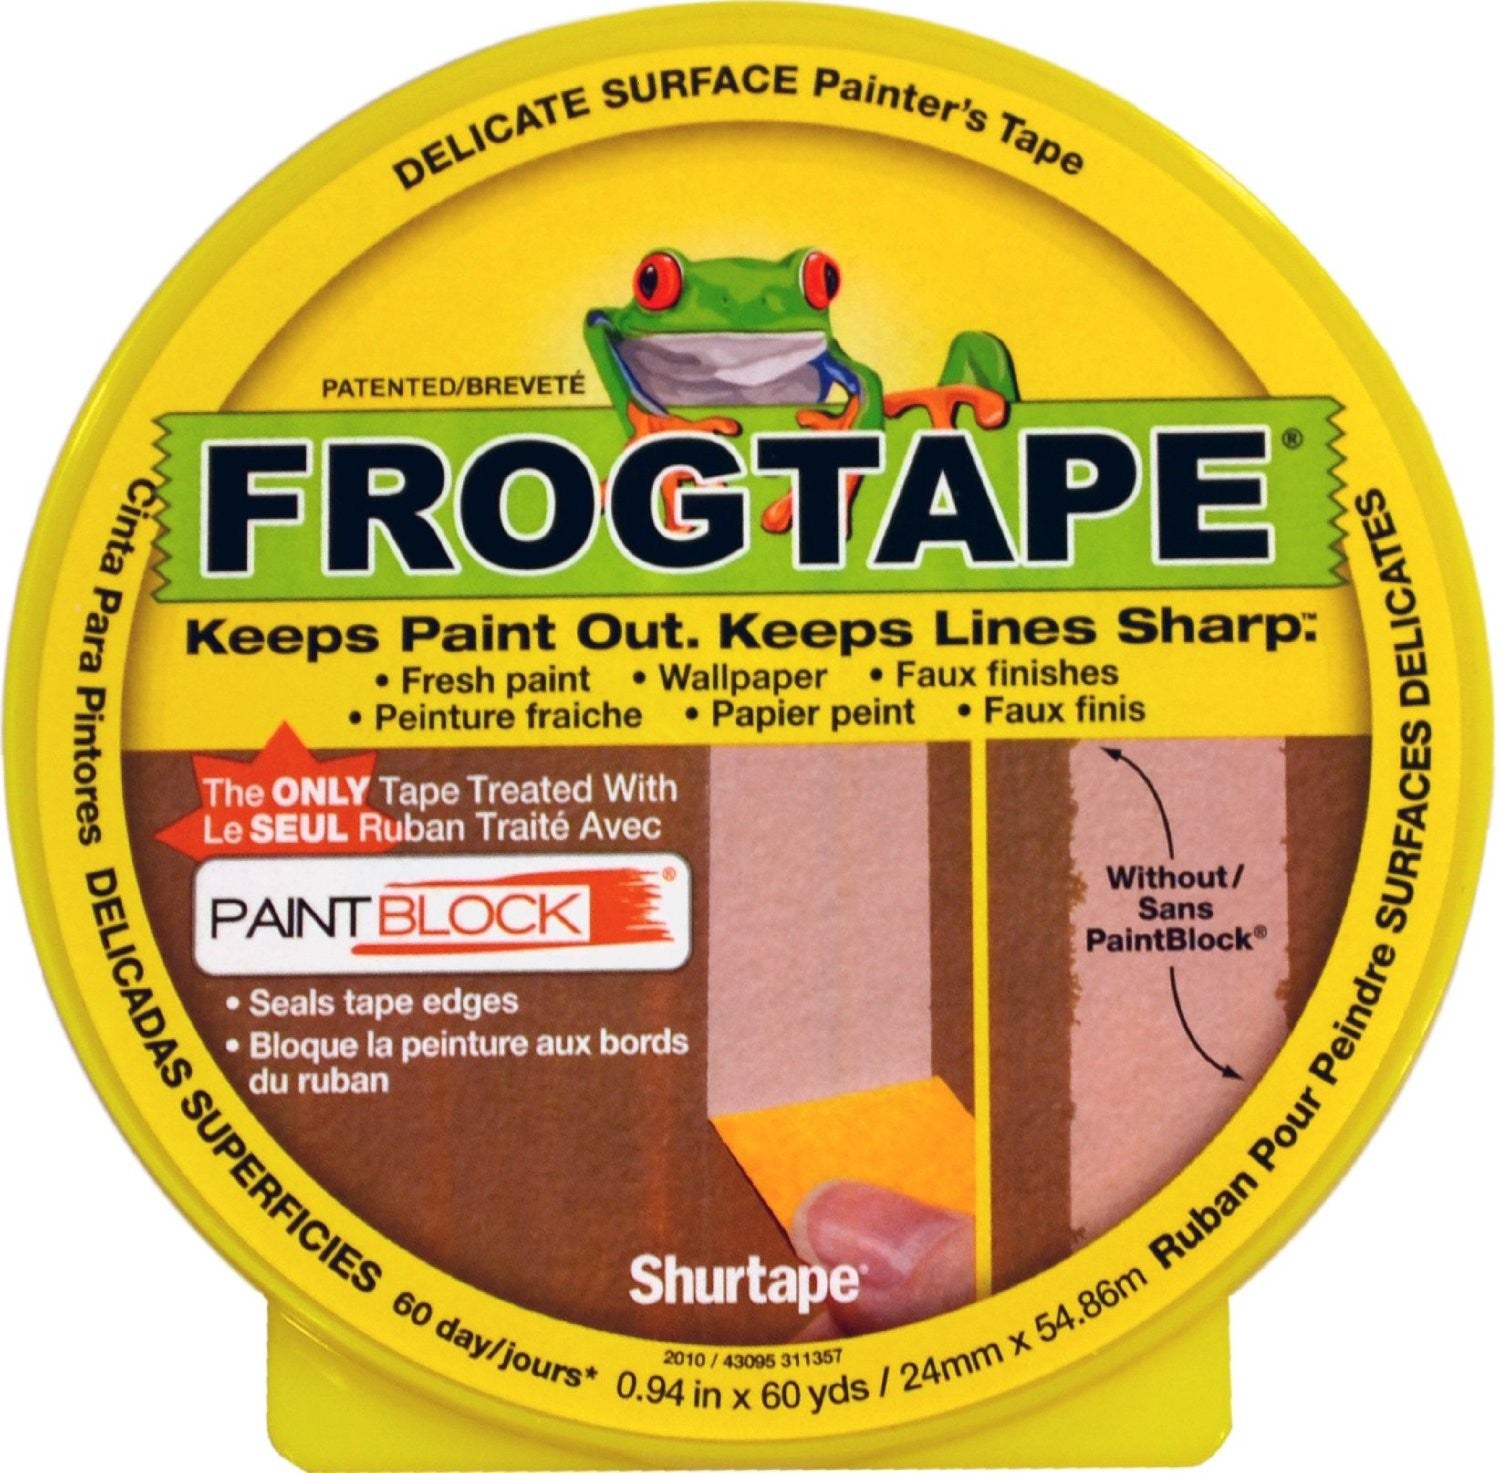 1" FrogTape Yellow Delicate Surface